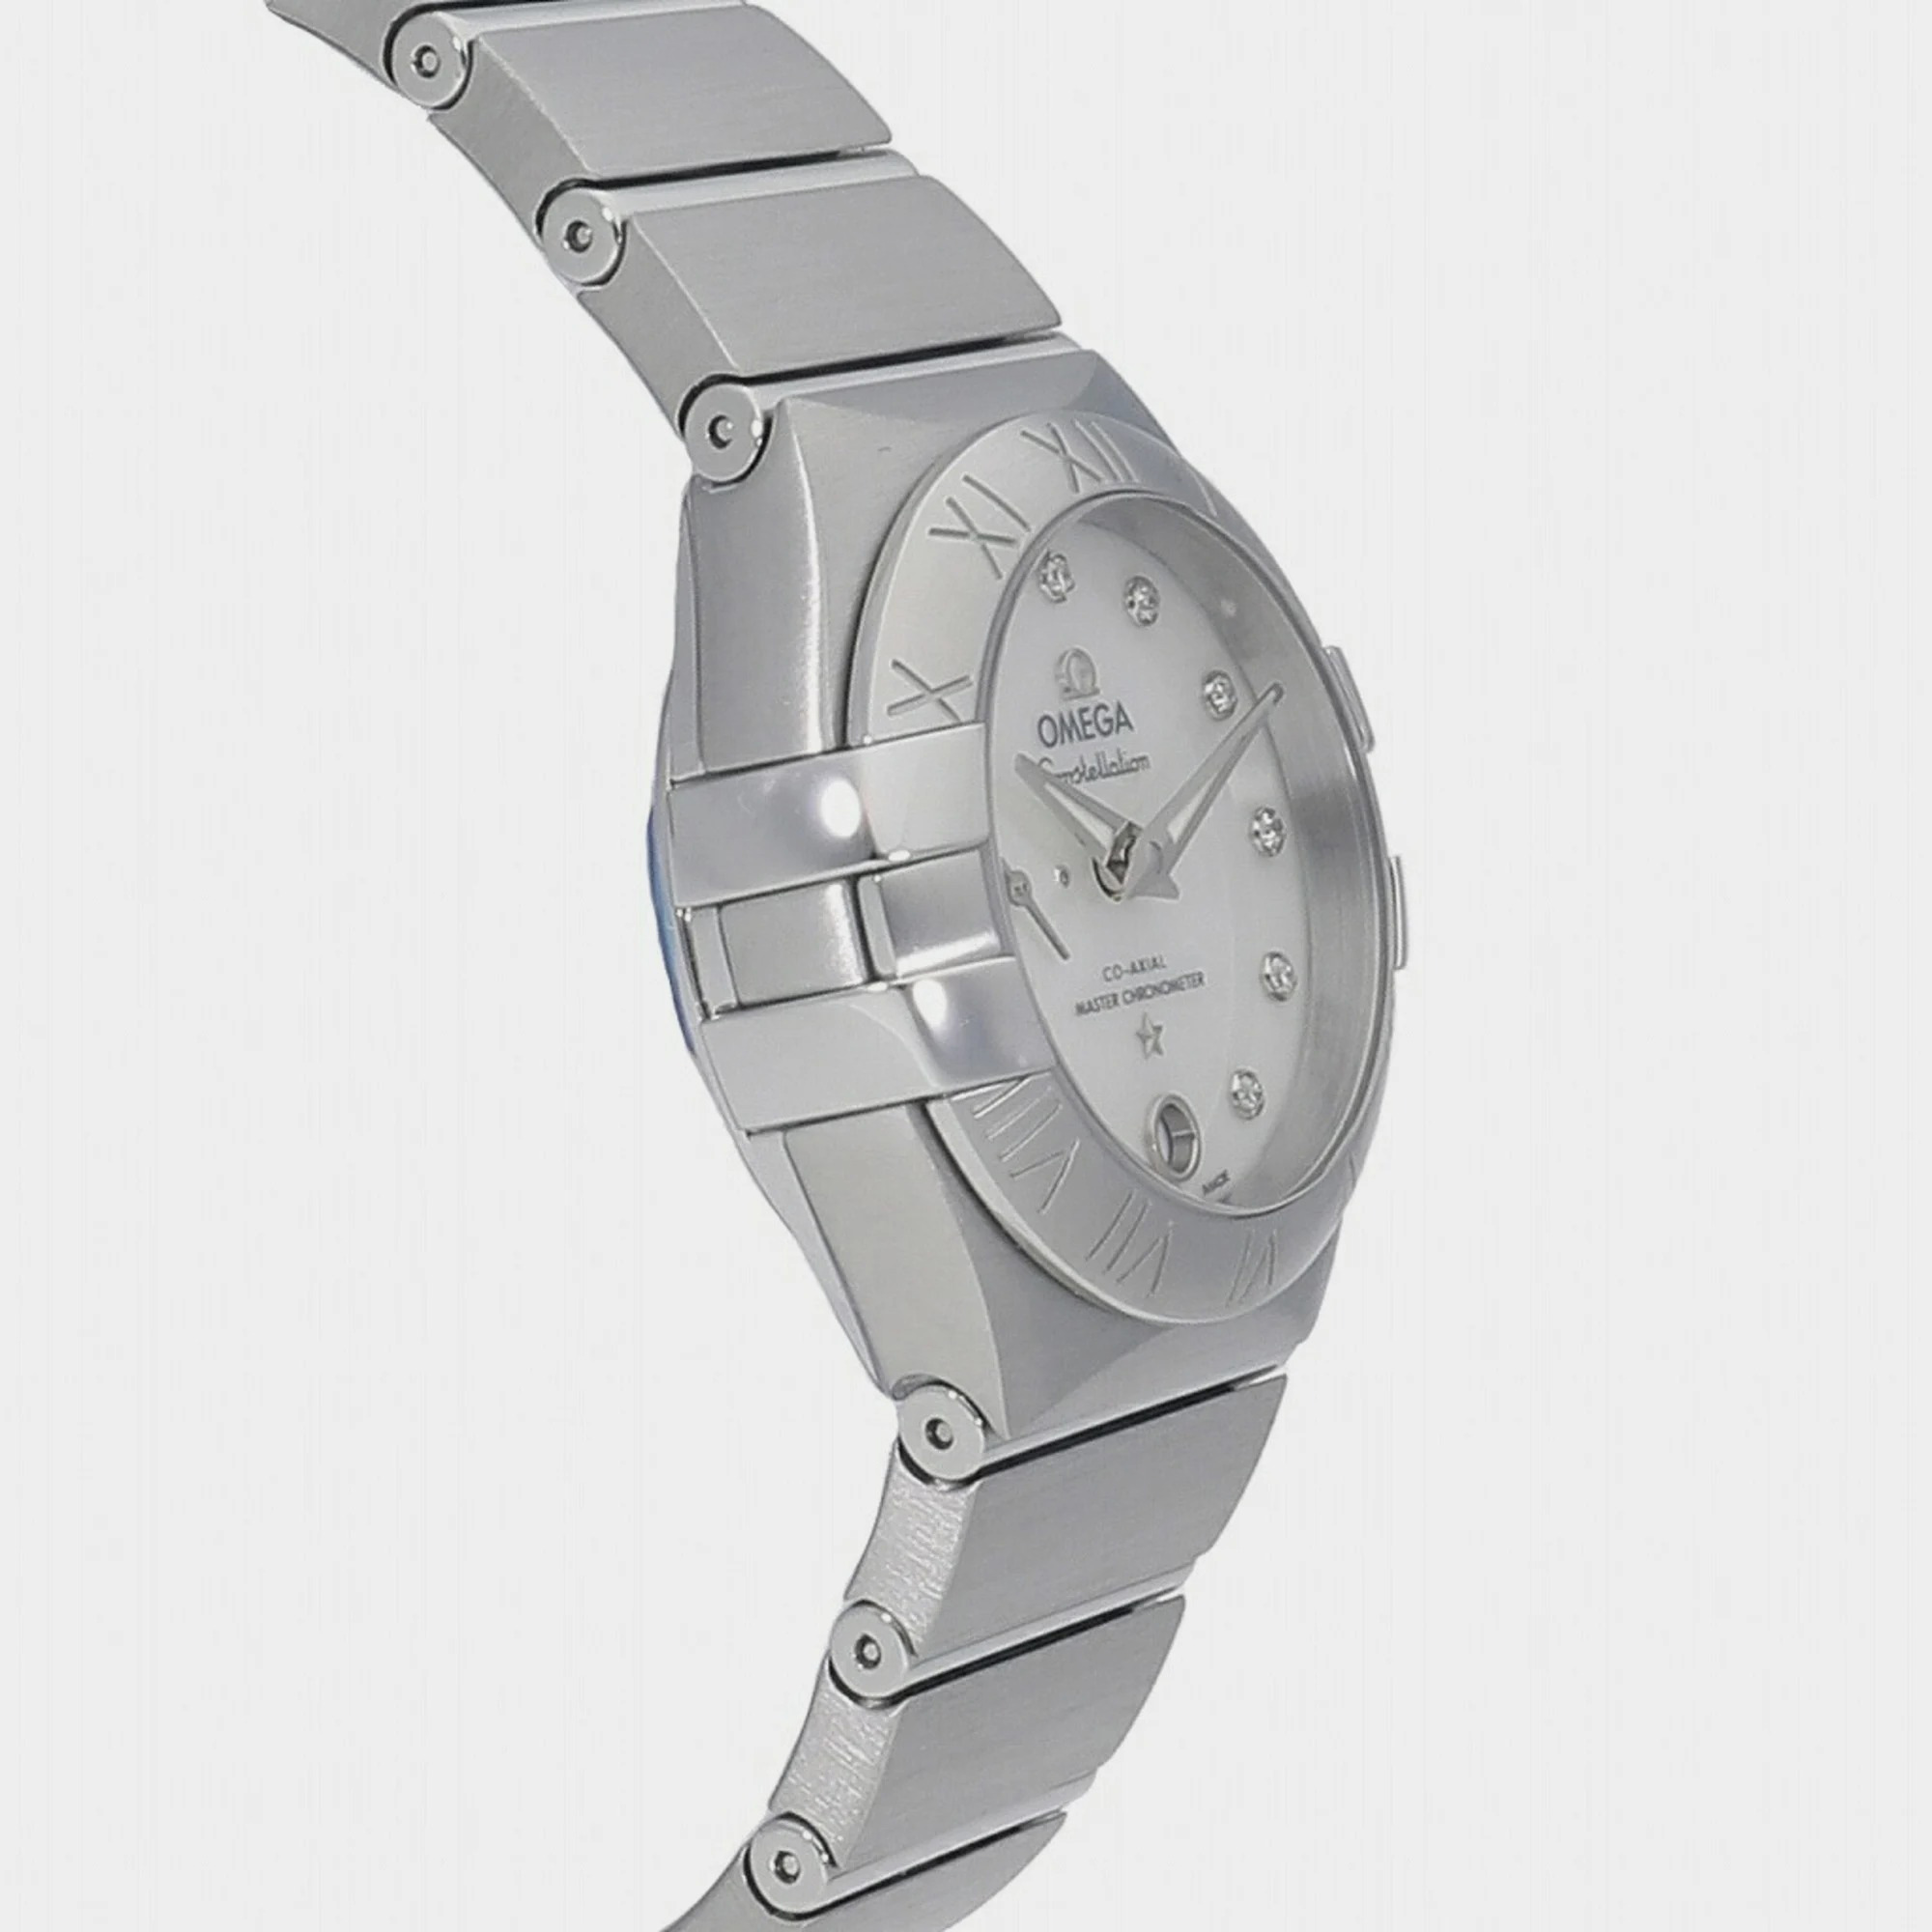 Omega White Shell Diamond Stainless Steel Constellation 127.10.27.20.55.001 Automatic Women's Wristwatch 27 Mm